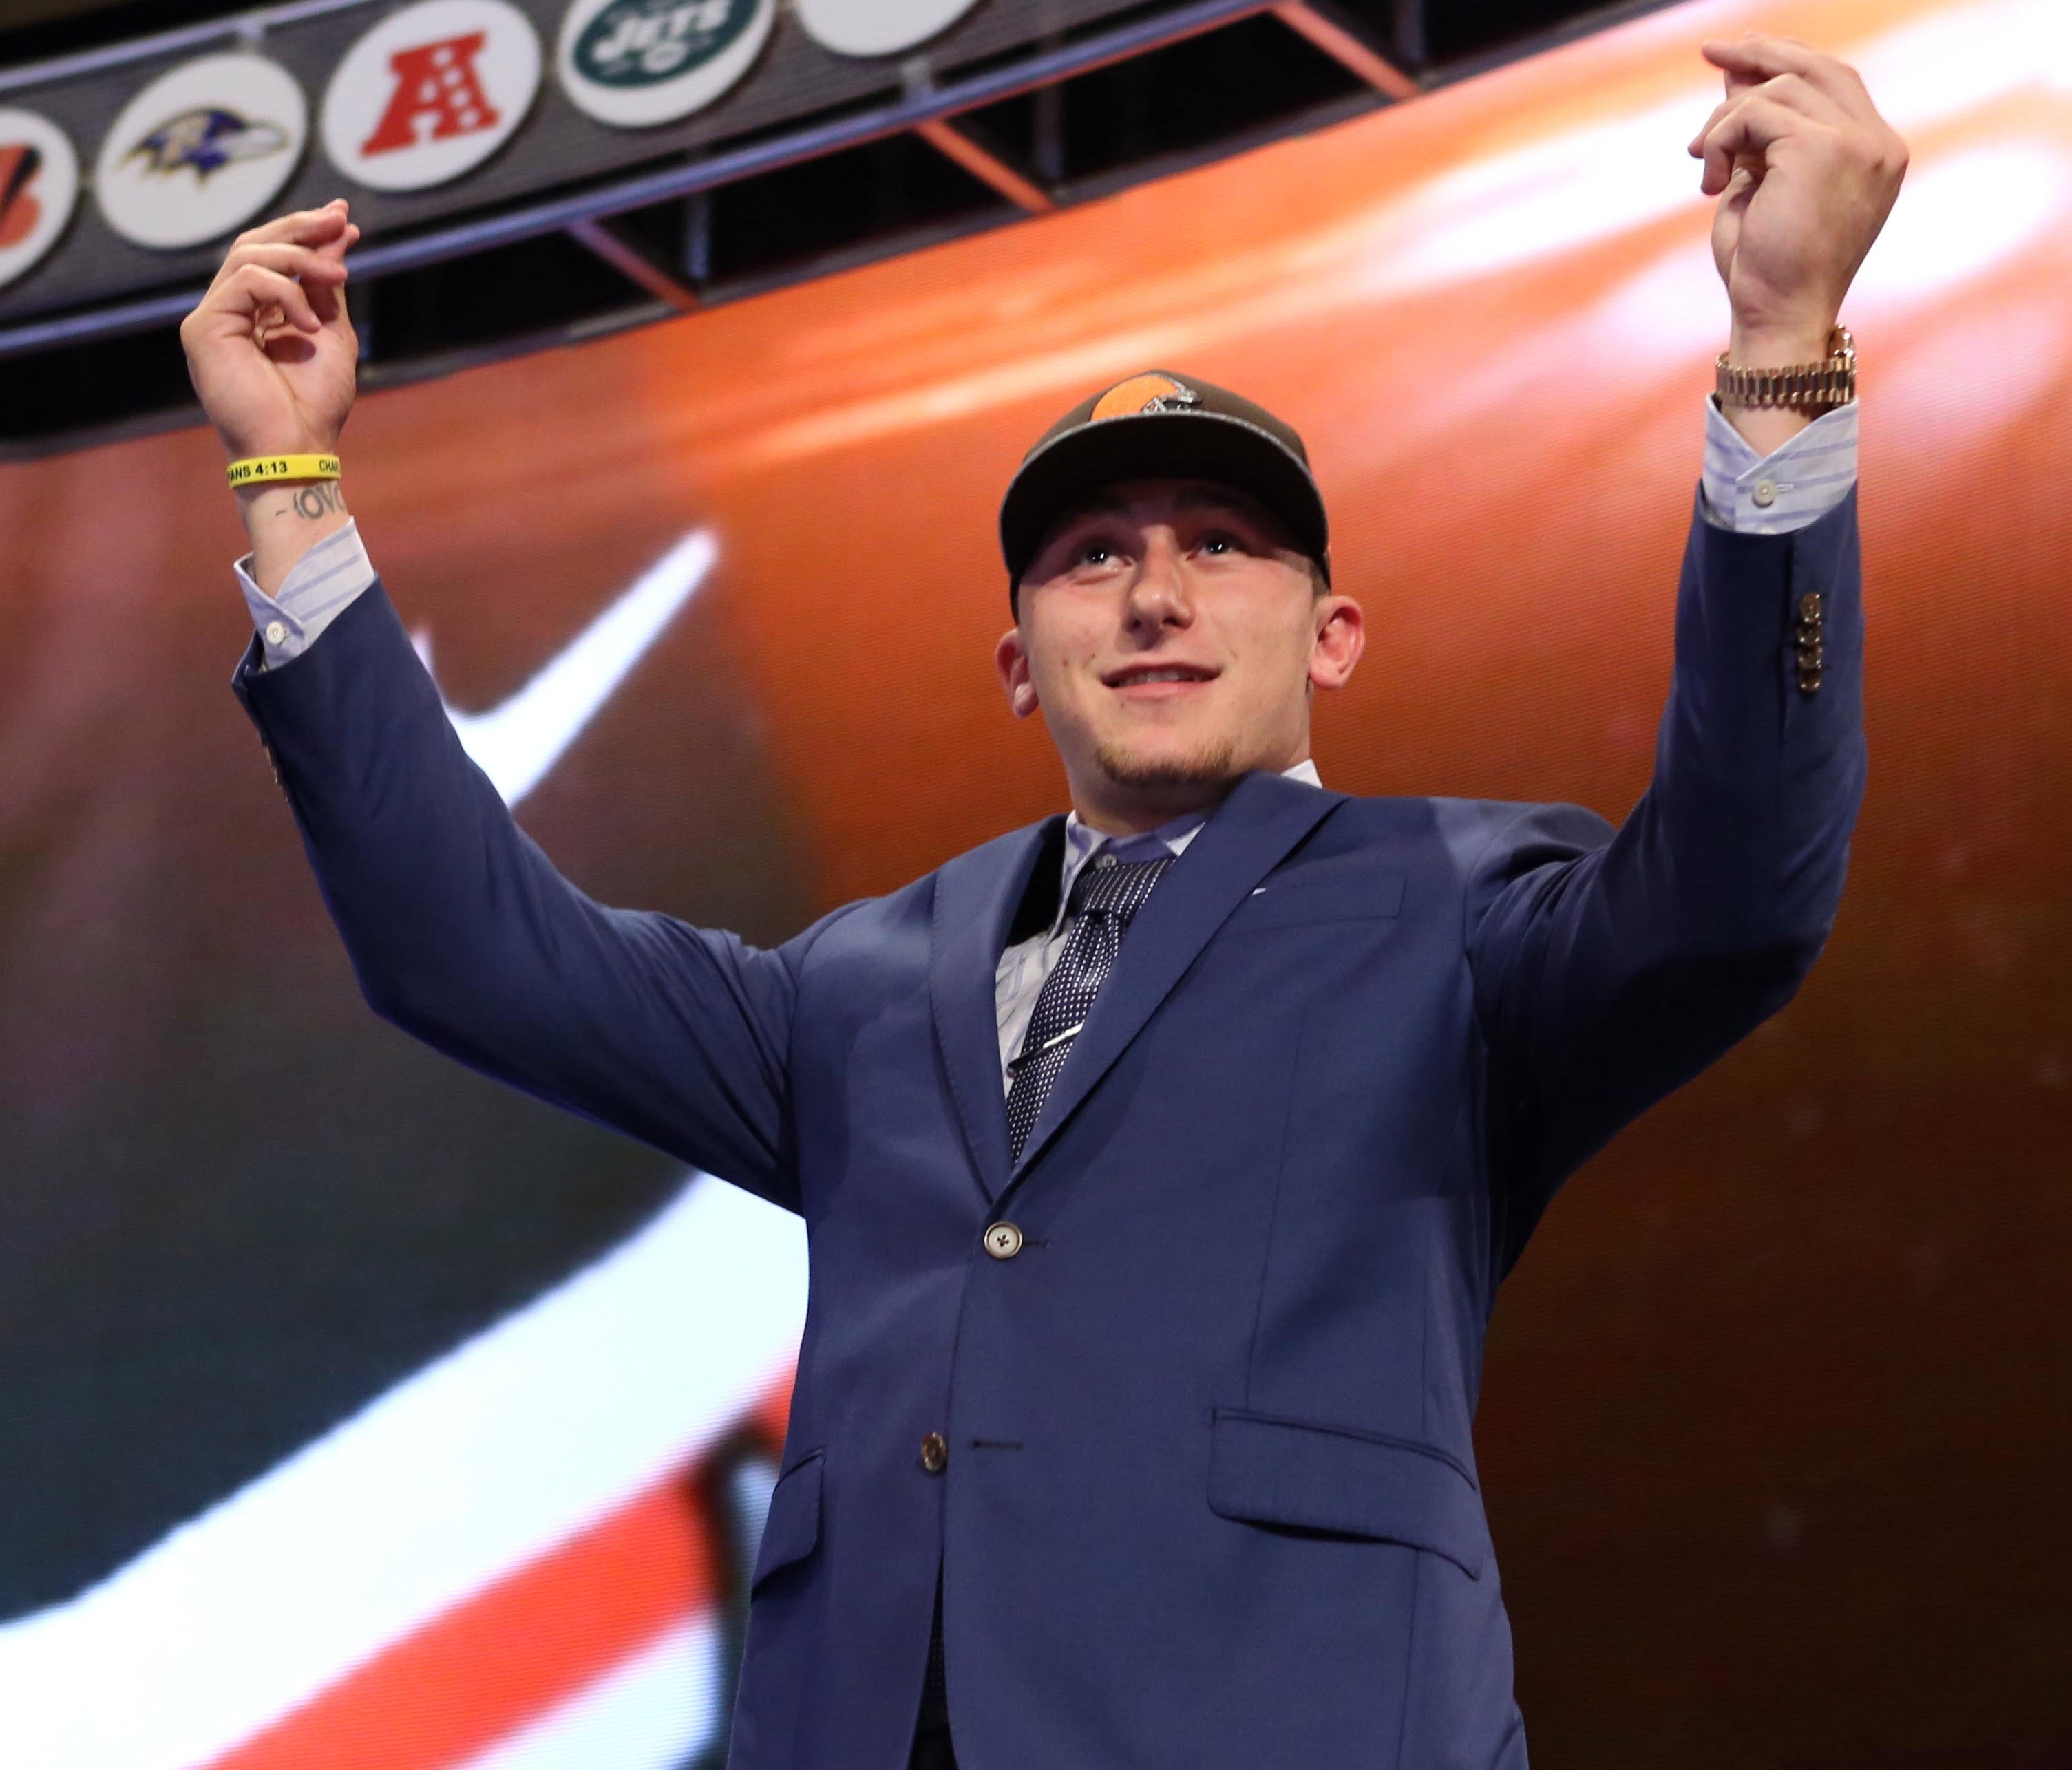 Johnny Manziel gestures on stage after being selected as the No. 22 overall pick in the first round of the 2014 NFL Draft.